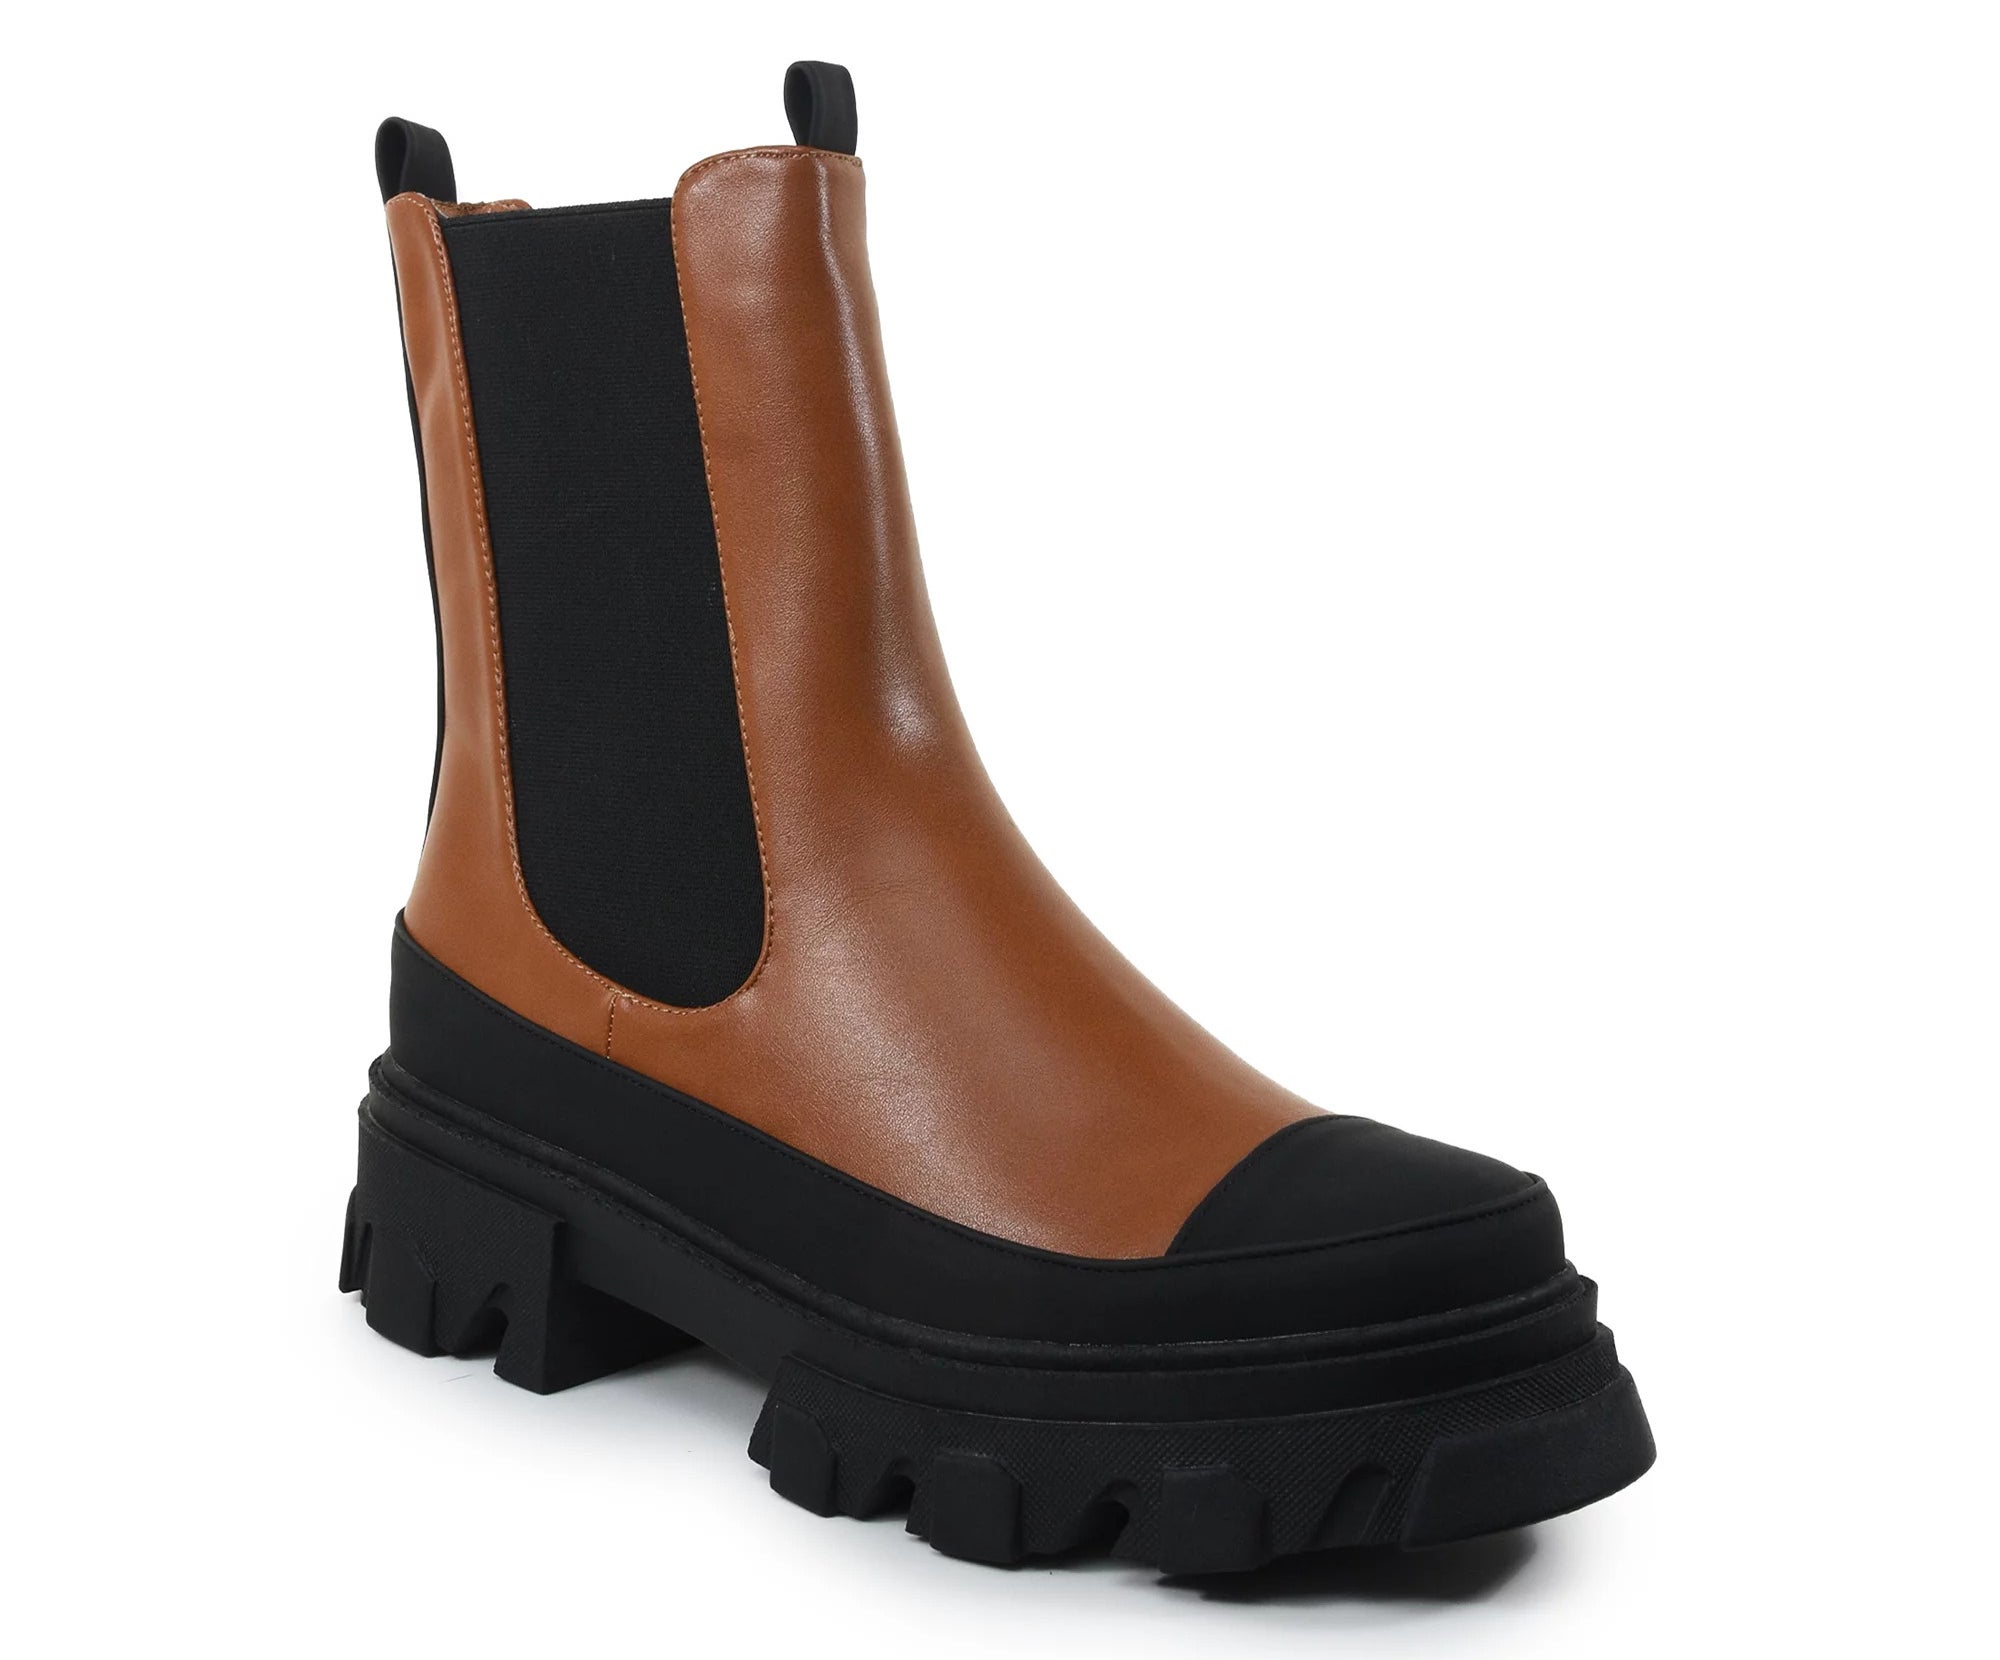 The boot in brown, with double pull tabs, elasticated sides, reinforced toe and sides, and a lug sole